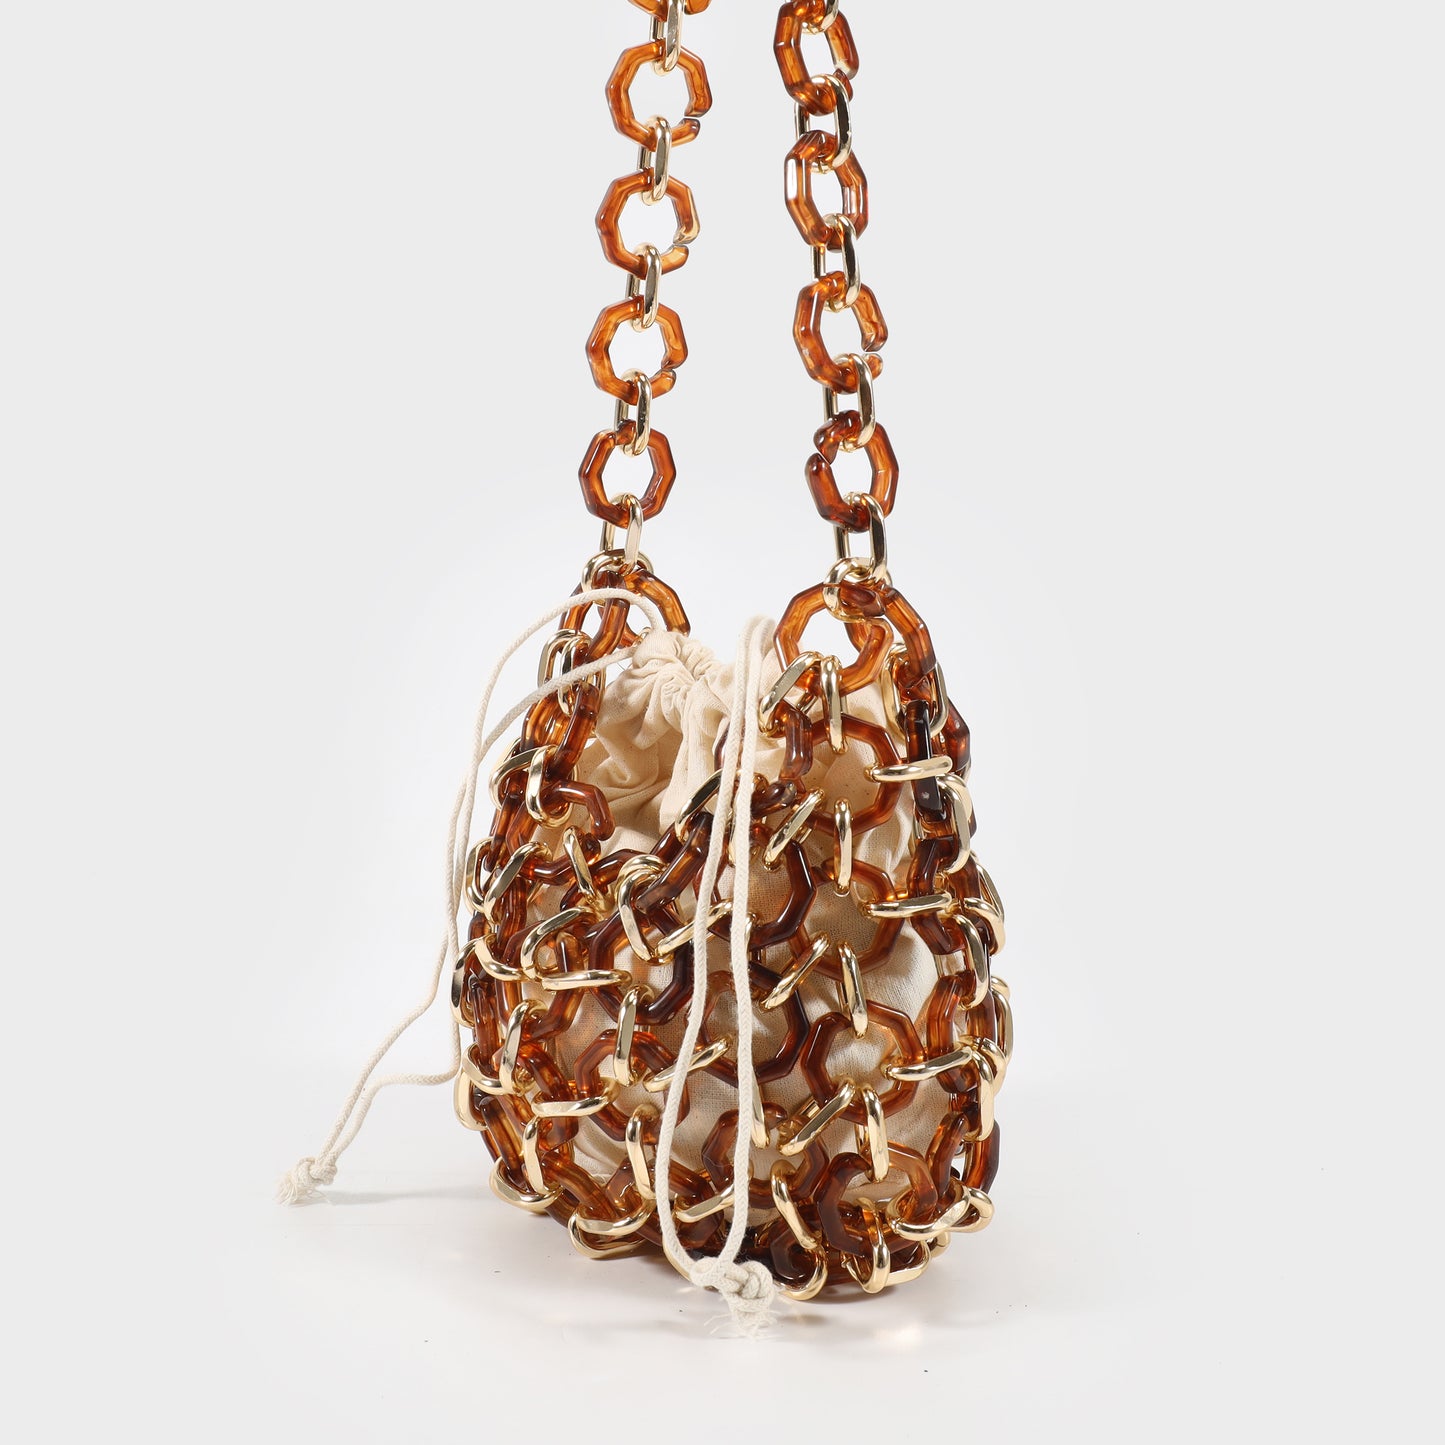 Shoulder bag with chains and internal fabric bag - AMBER